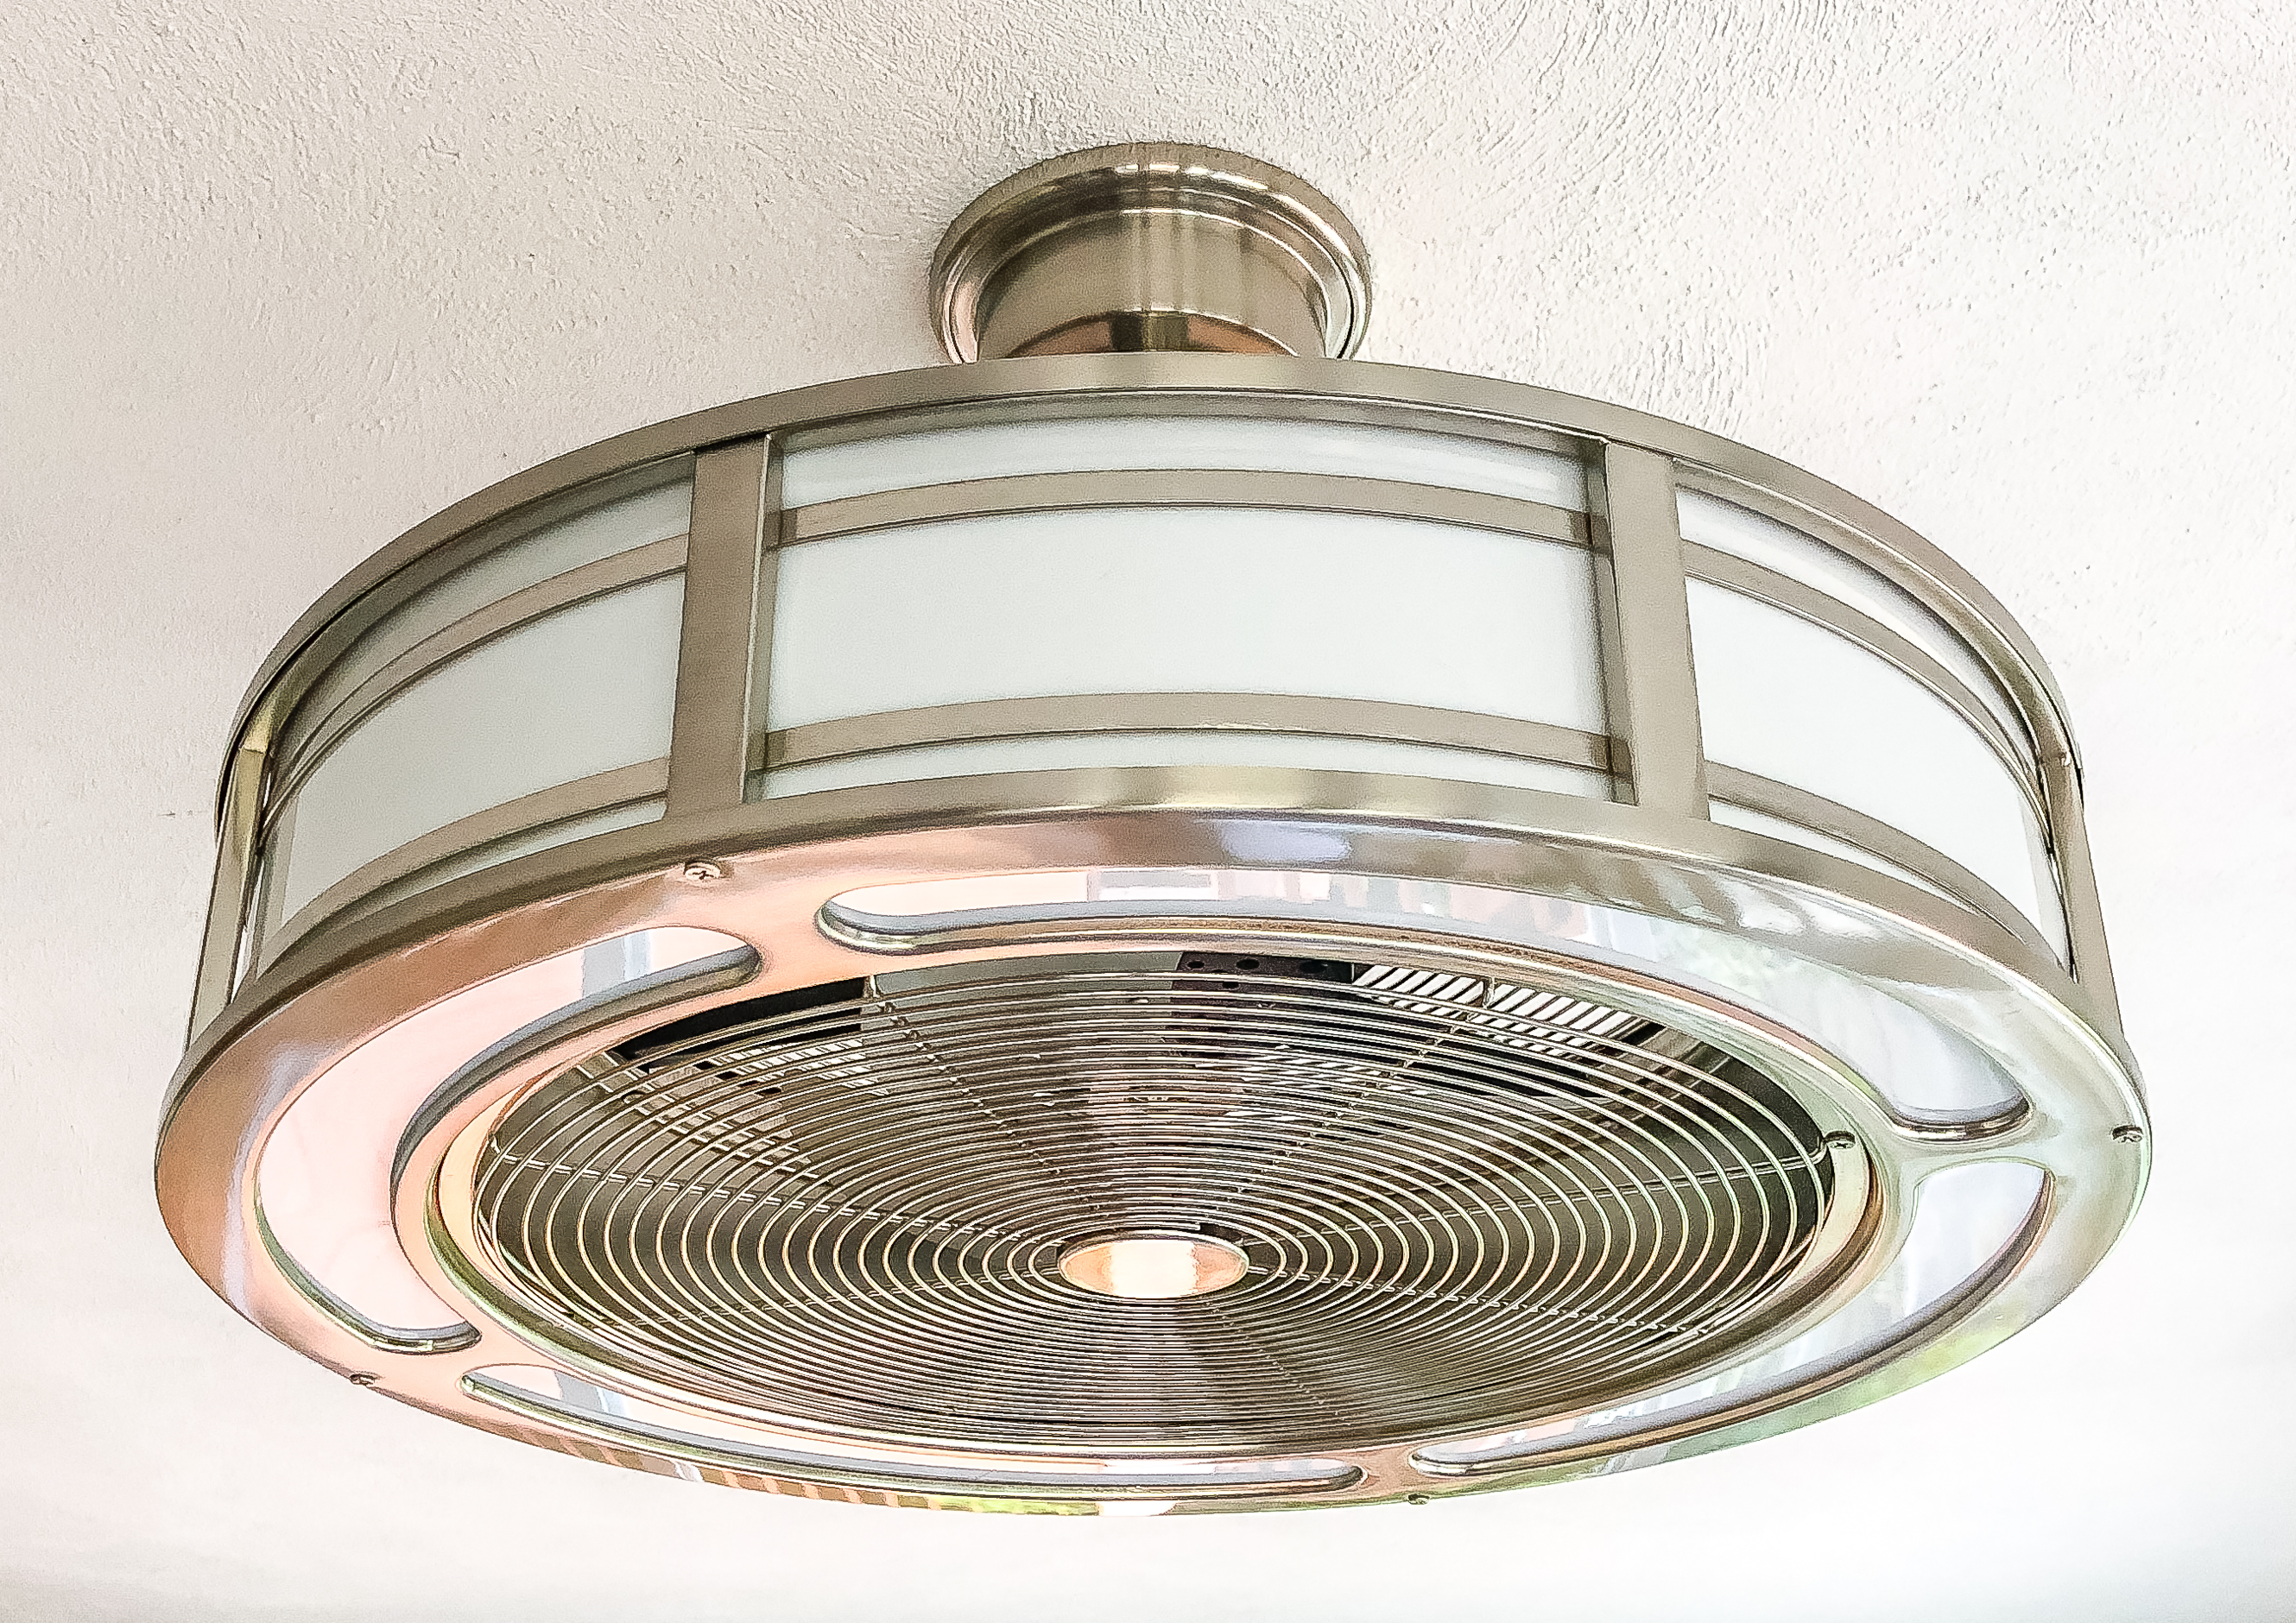 Home Decorators Collection Brette 23" Indoor/Outdoor Brushed Nickel fan from Home Depot installed in a sunporch.